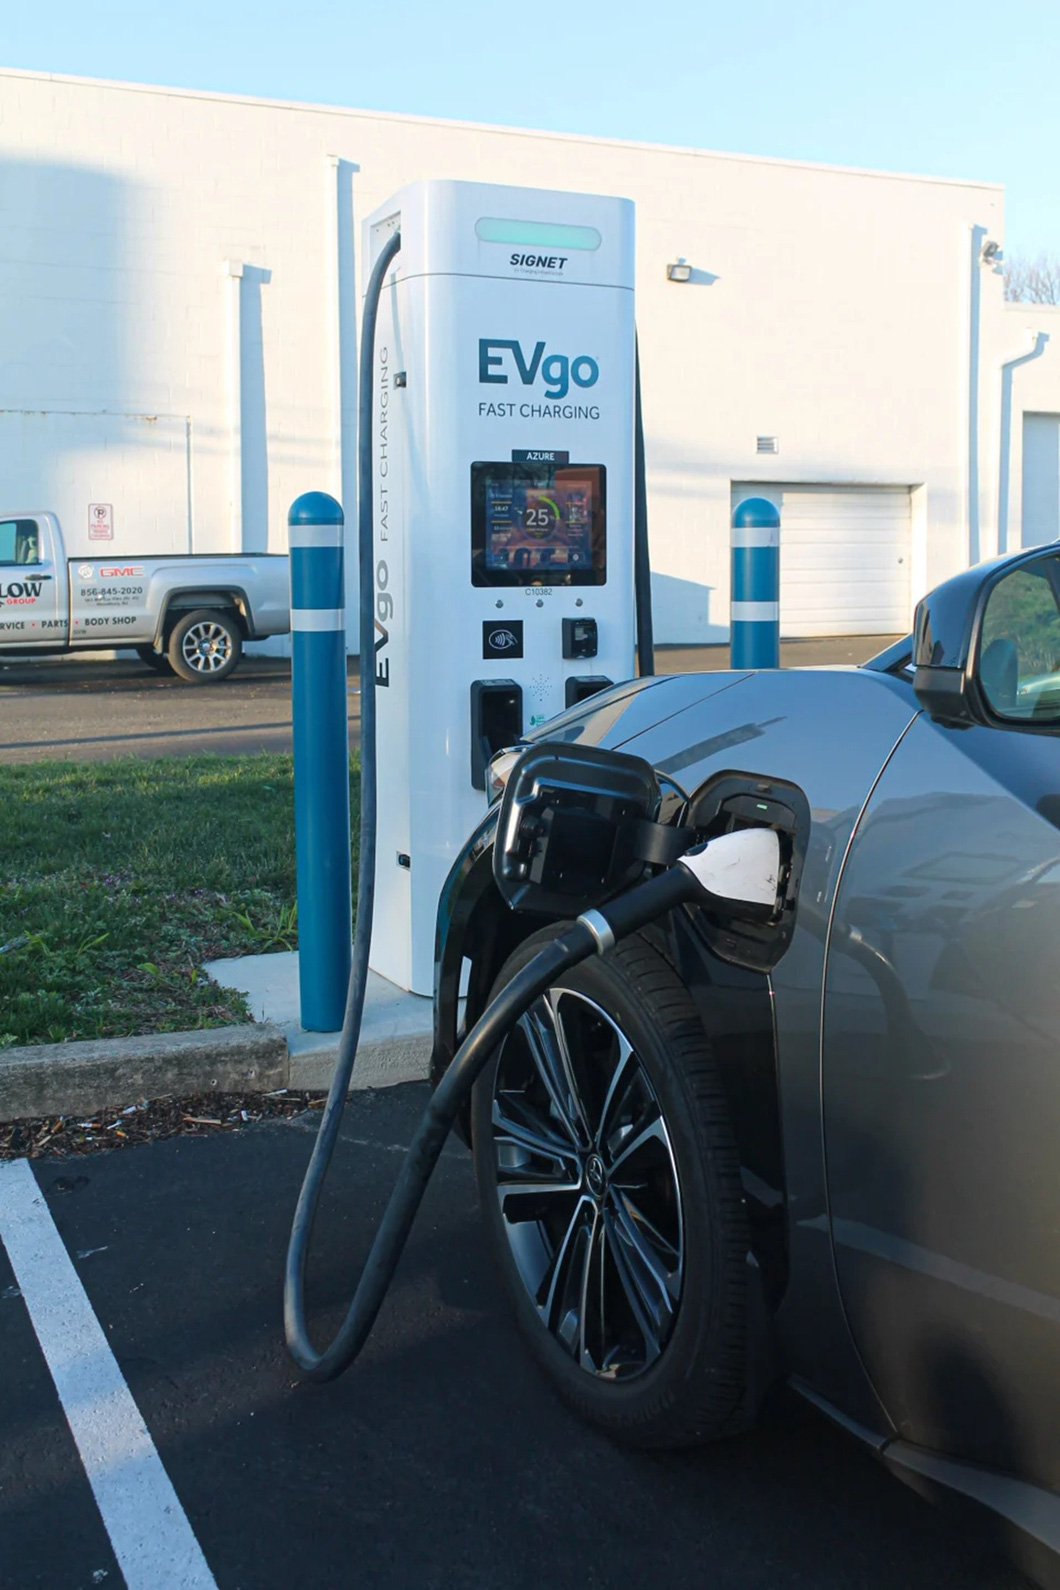 Regular charging isn't as popular as fast charging, but it's worse not to have it - Photo: Insider